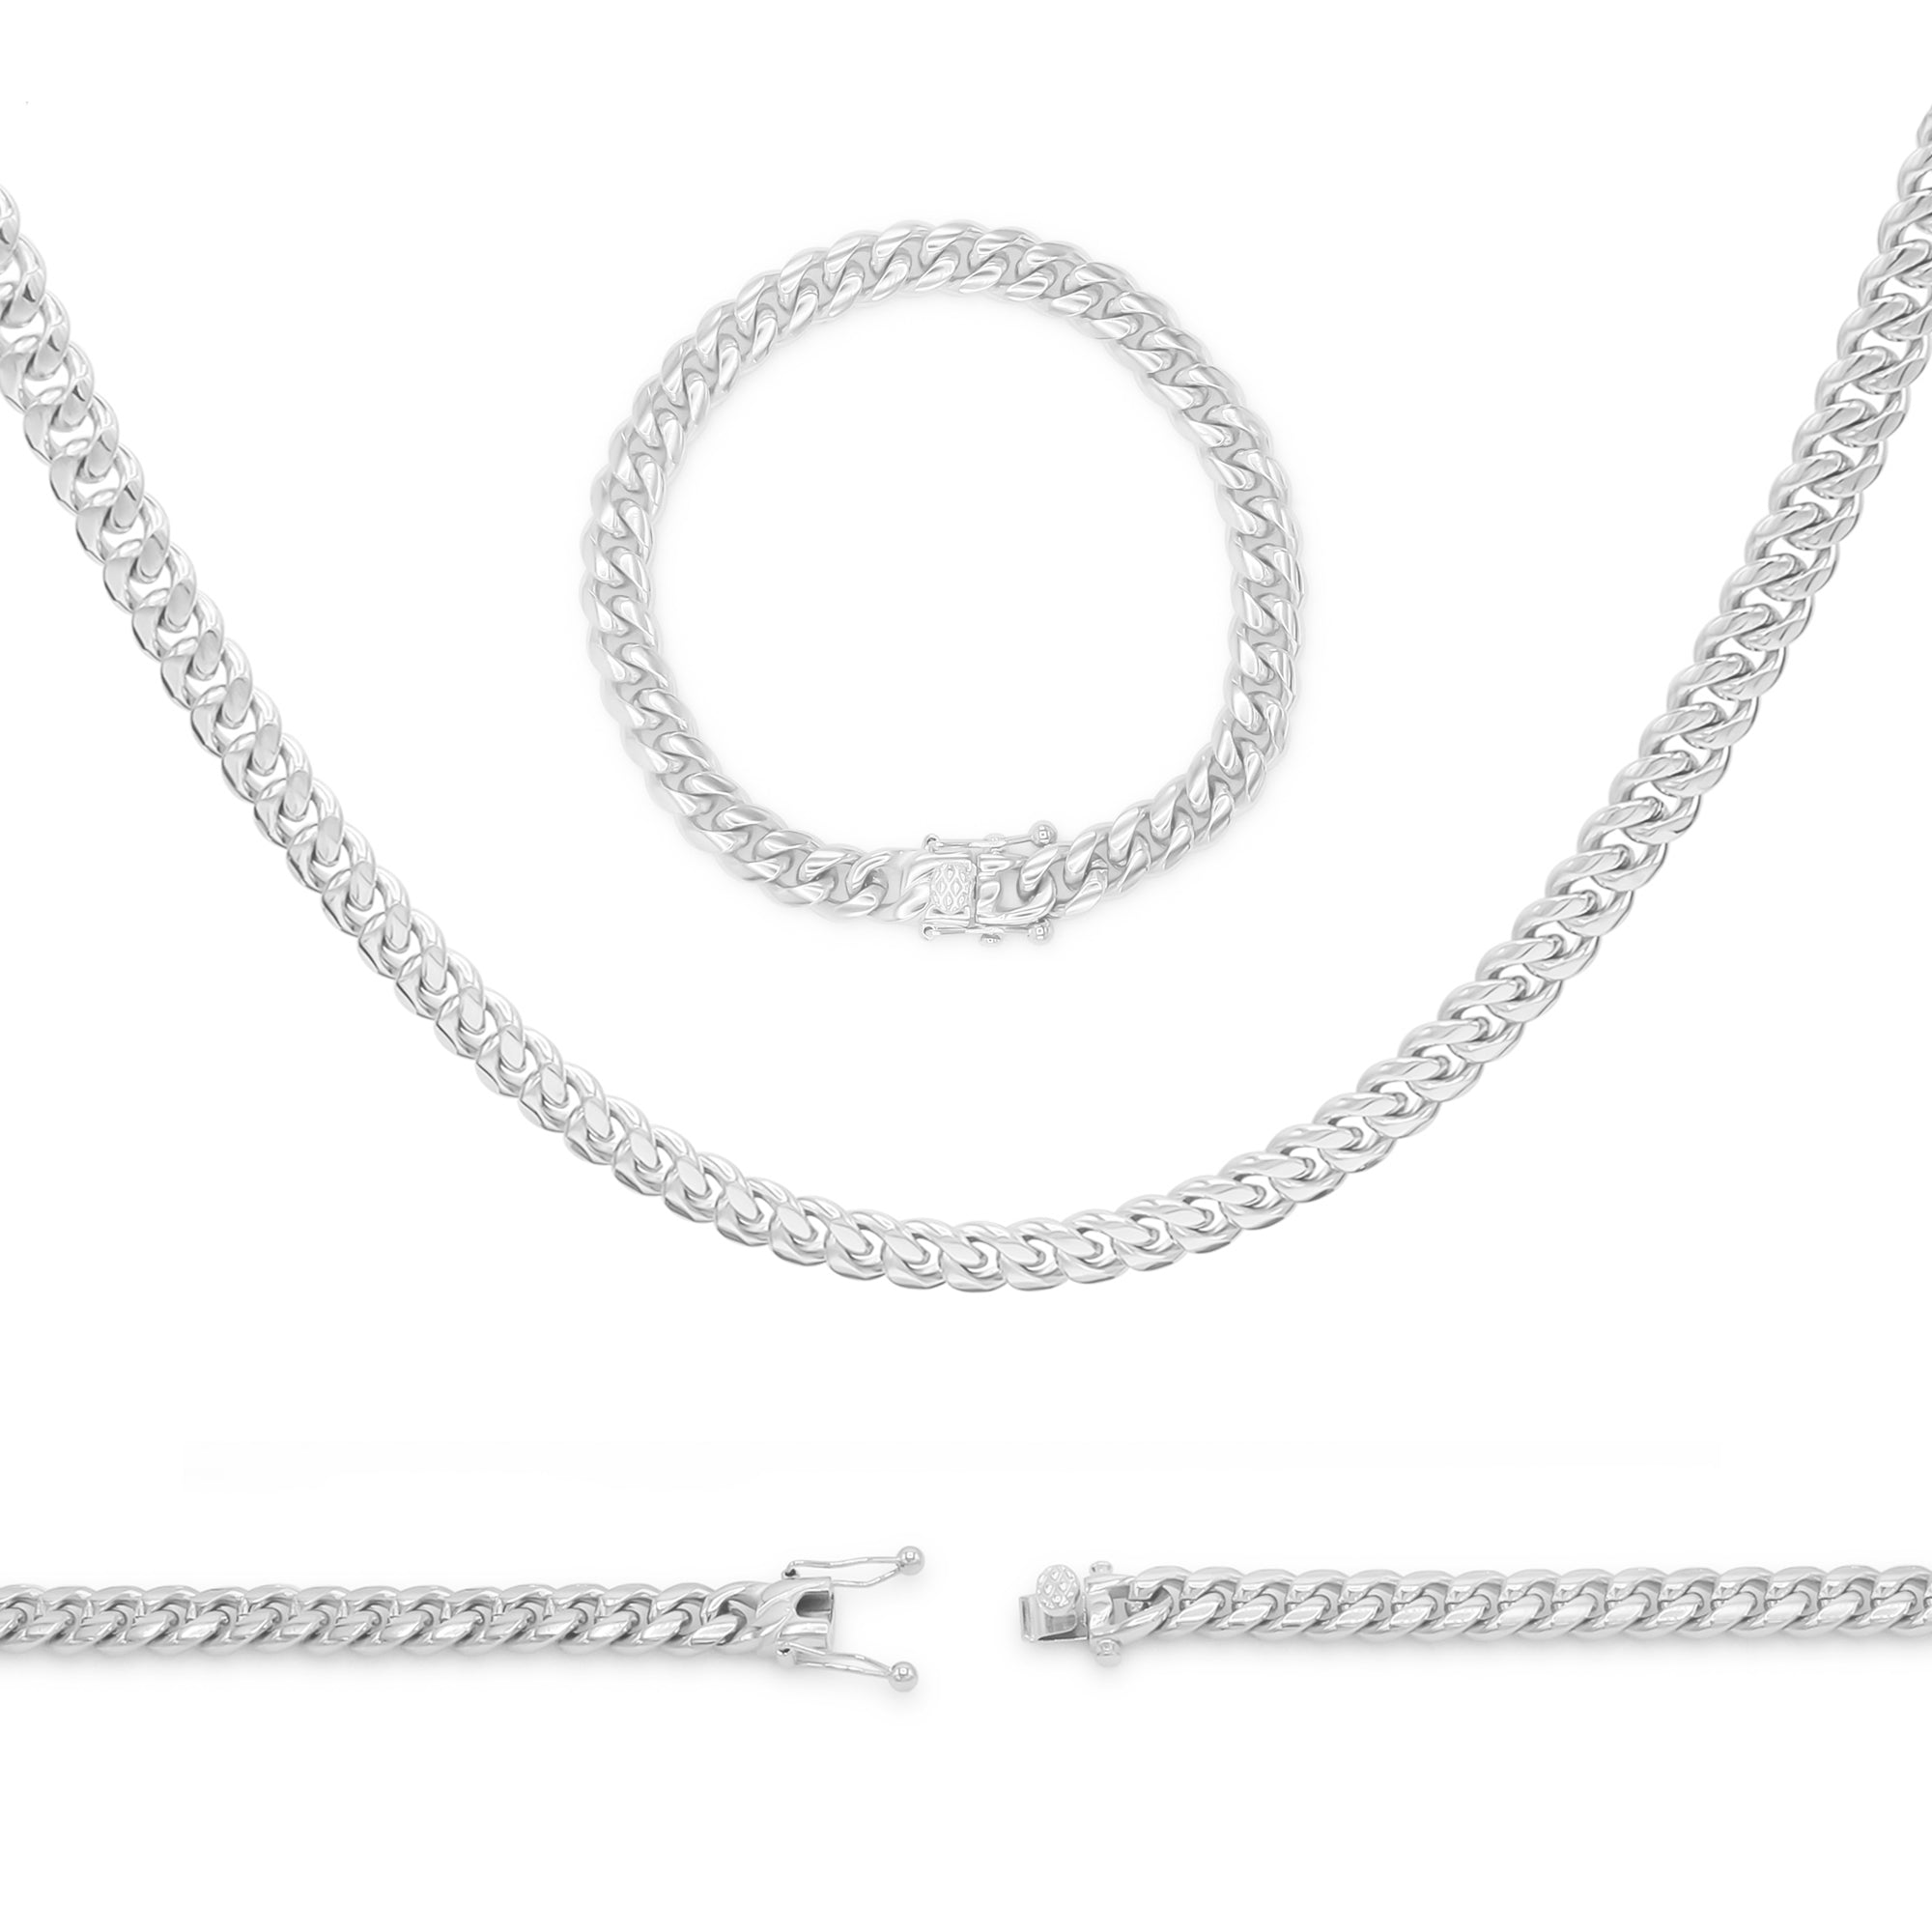 Stainless Steel Chain Necklaces for Men, Necklace Chains for Women,  Stainless Steel Hypo Allergenic Chains, Fashion Necklaces for Men, Women